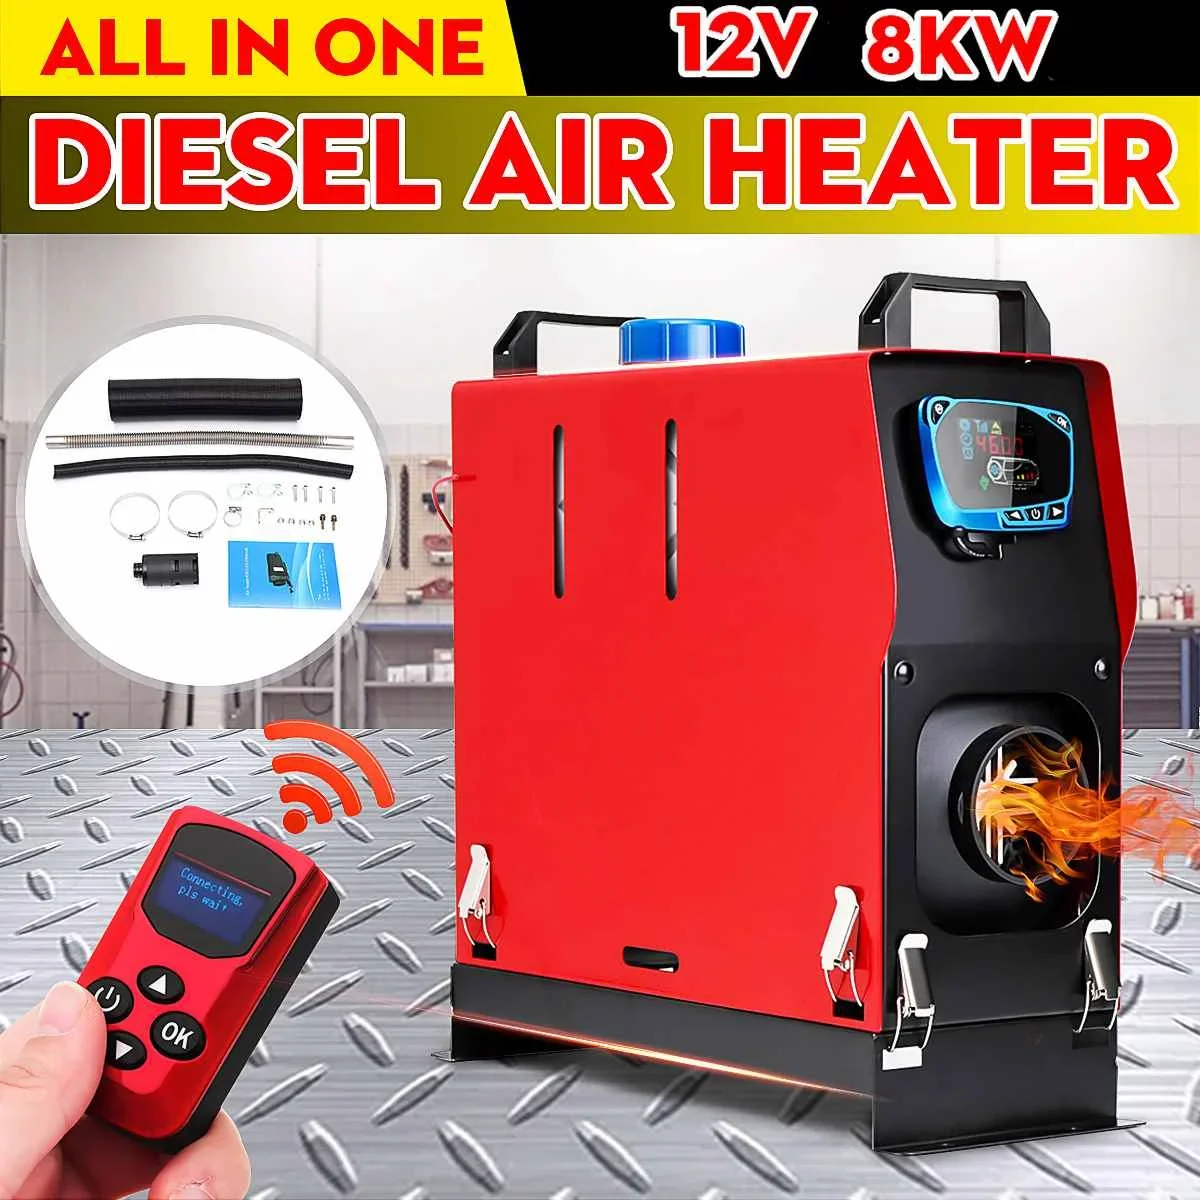 

All in One 5-8KW 12V Car Heater Diesels Air Heater Single Hole New LCD Monitor+Remote Parking Warmer For Car Truck Bus Boat RV